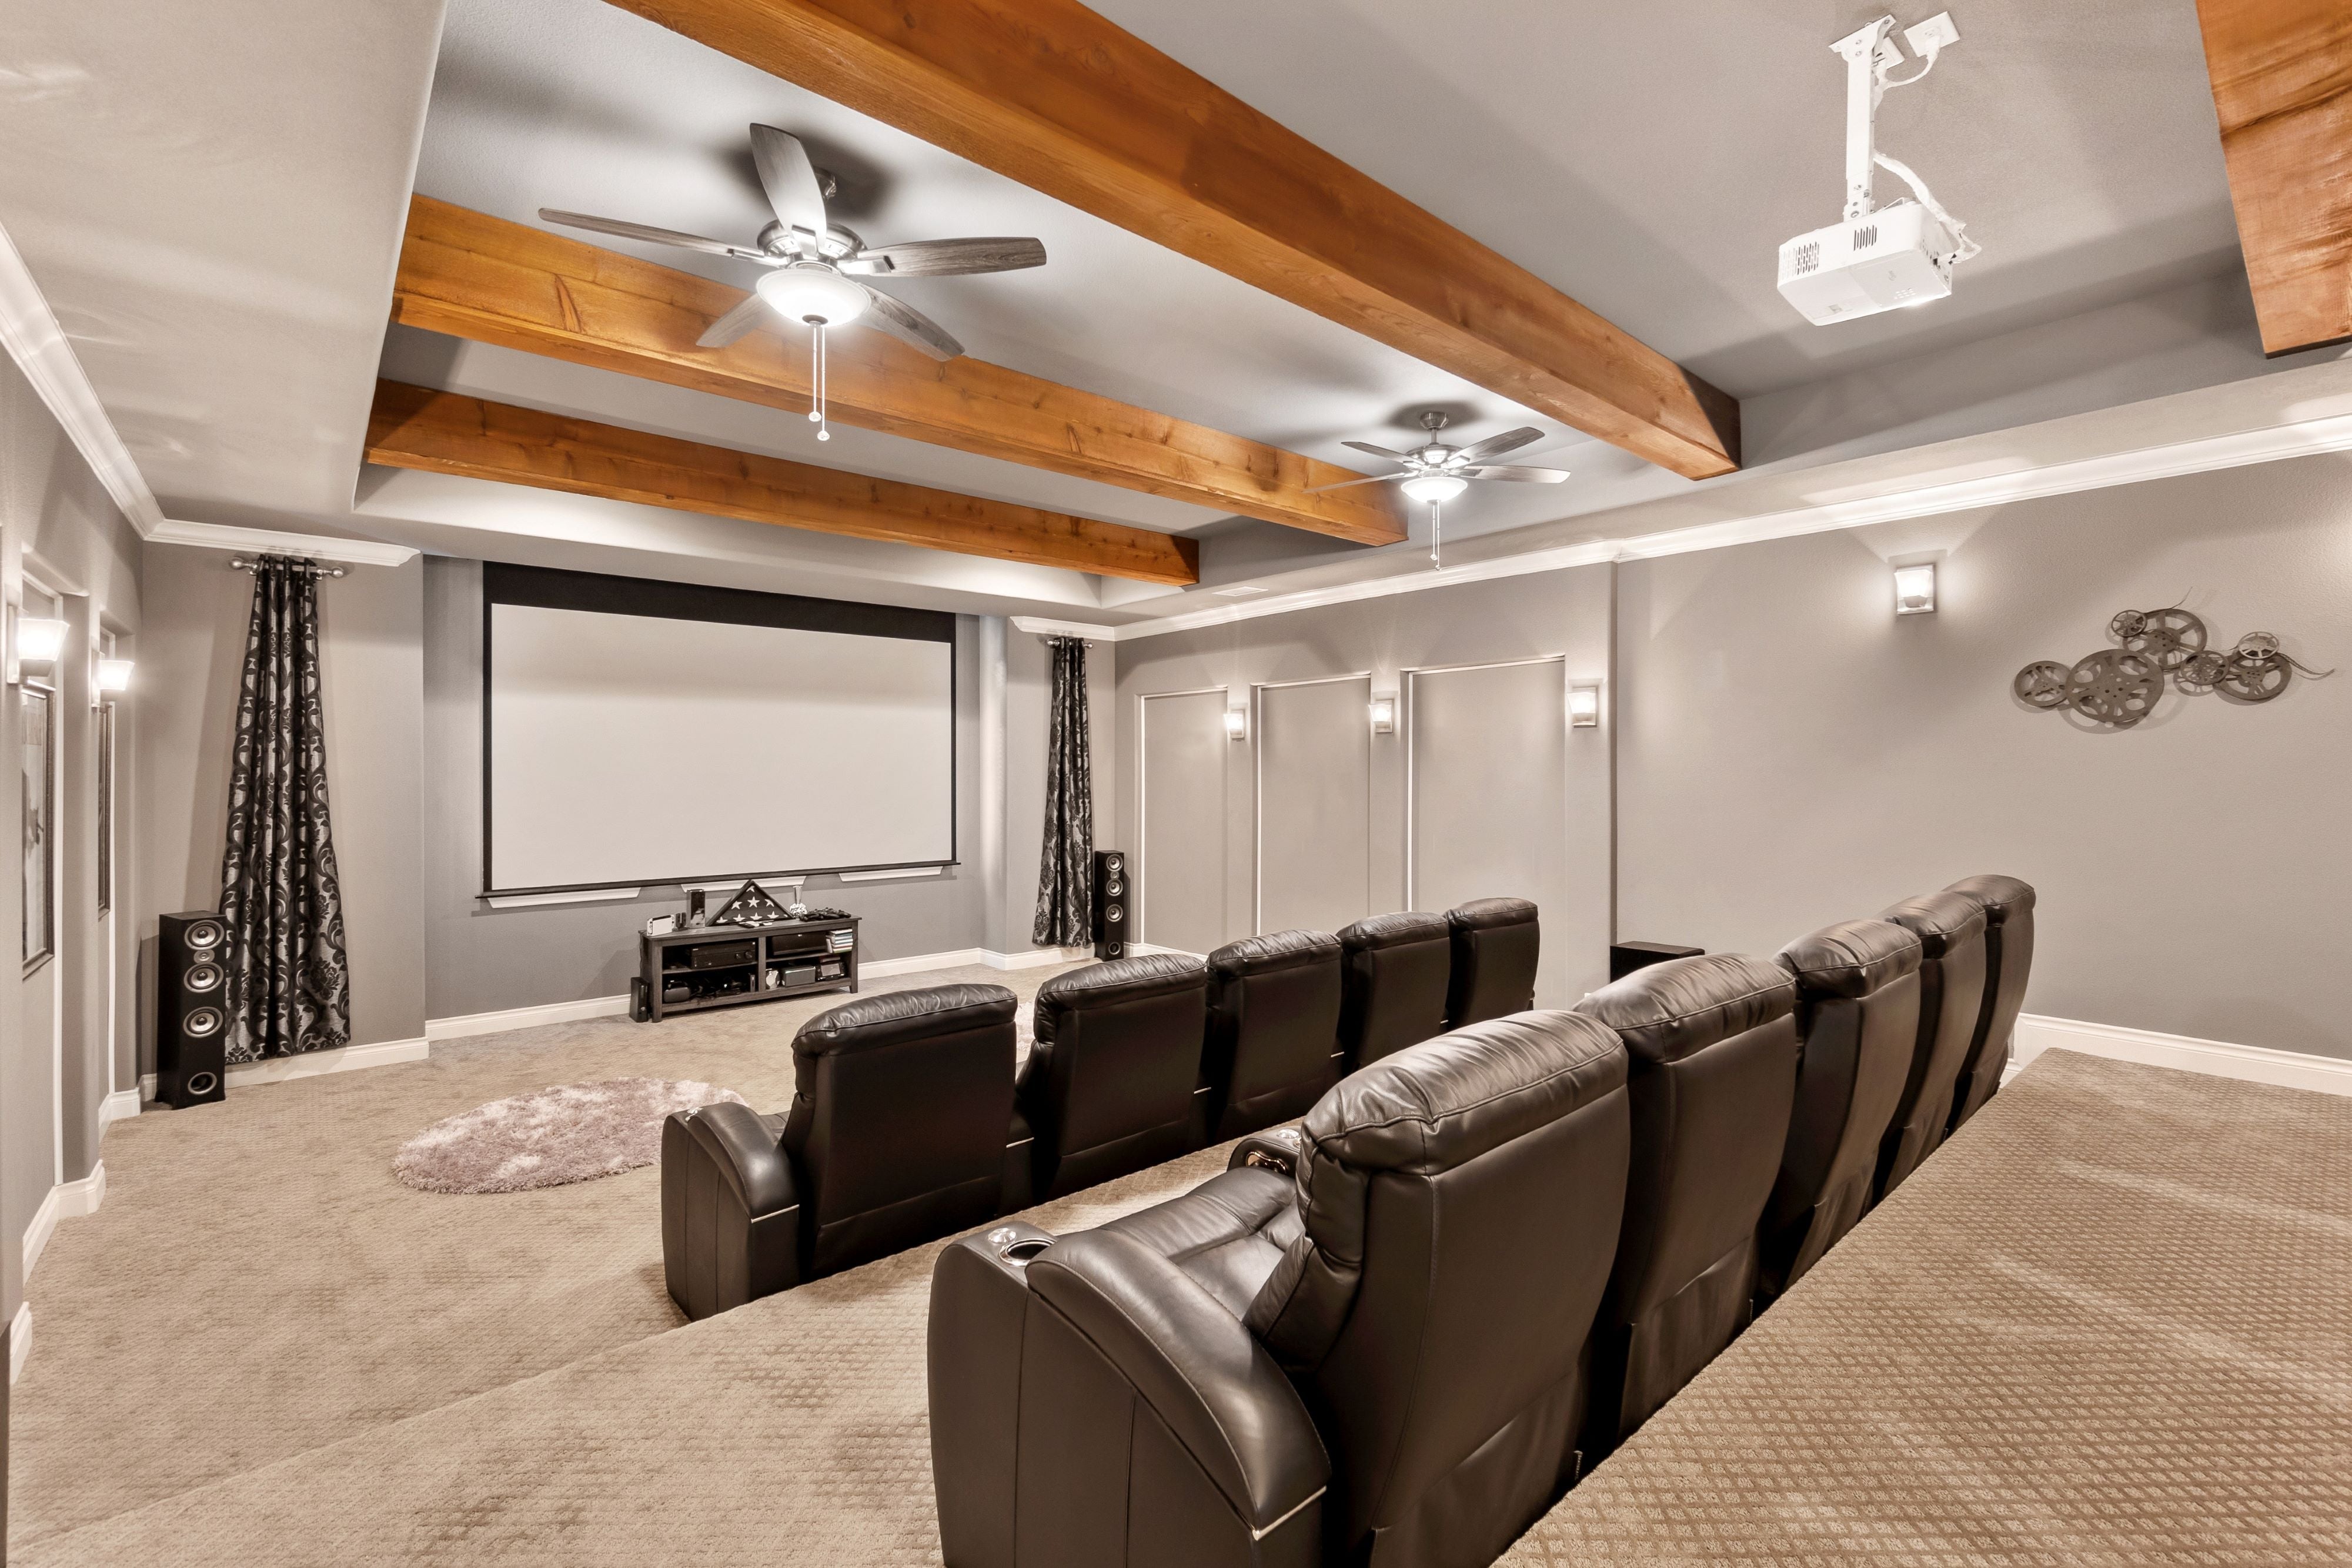 Choosing a Room for a Home Theater